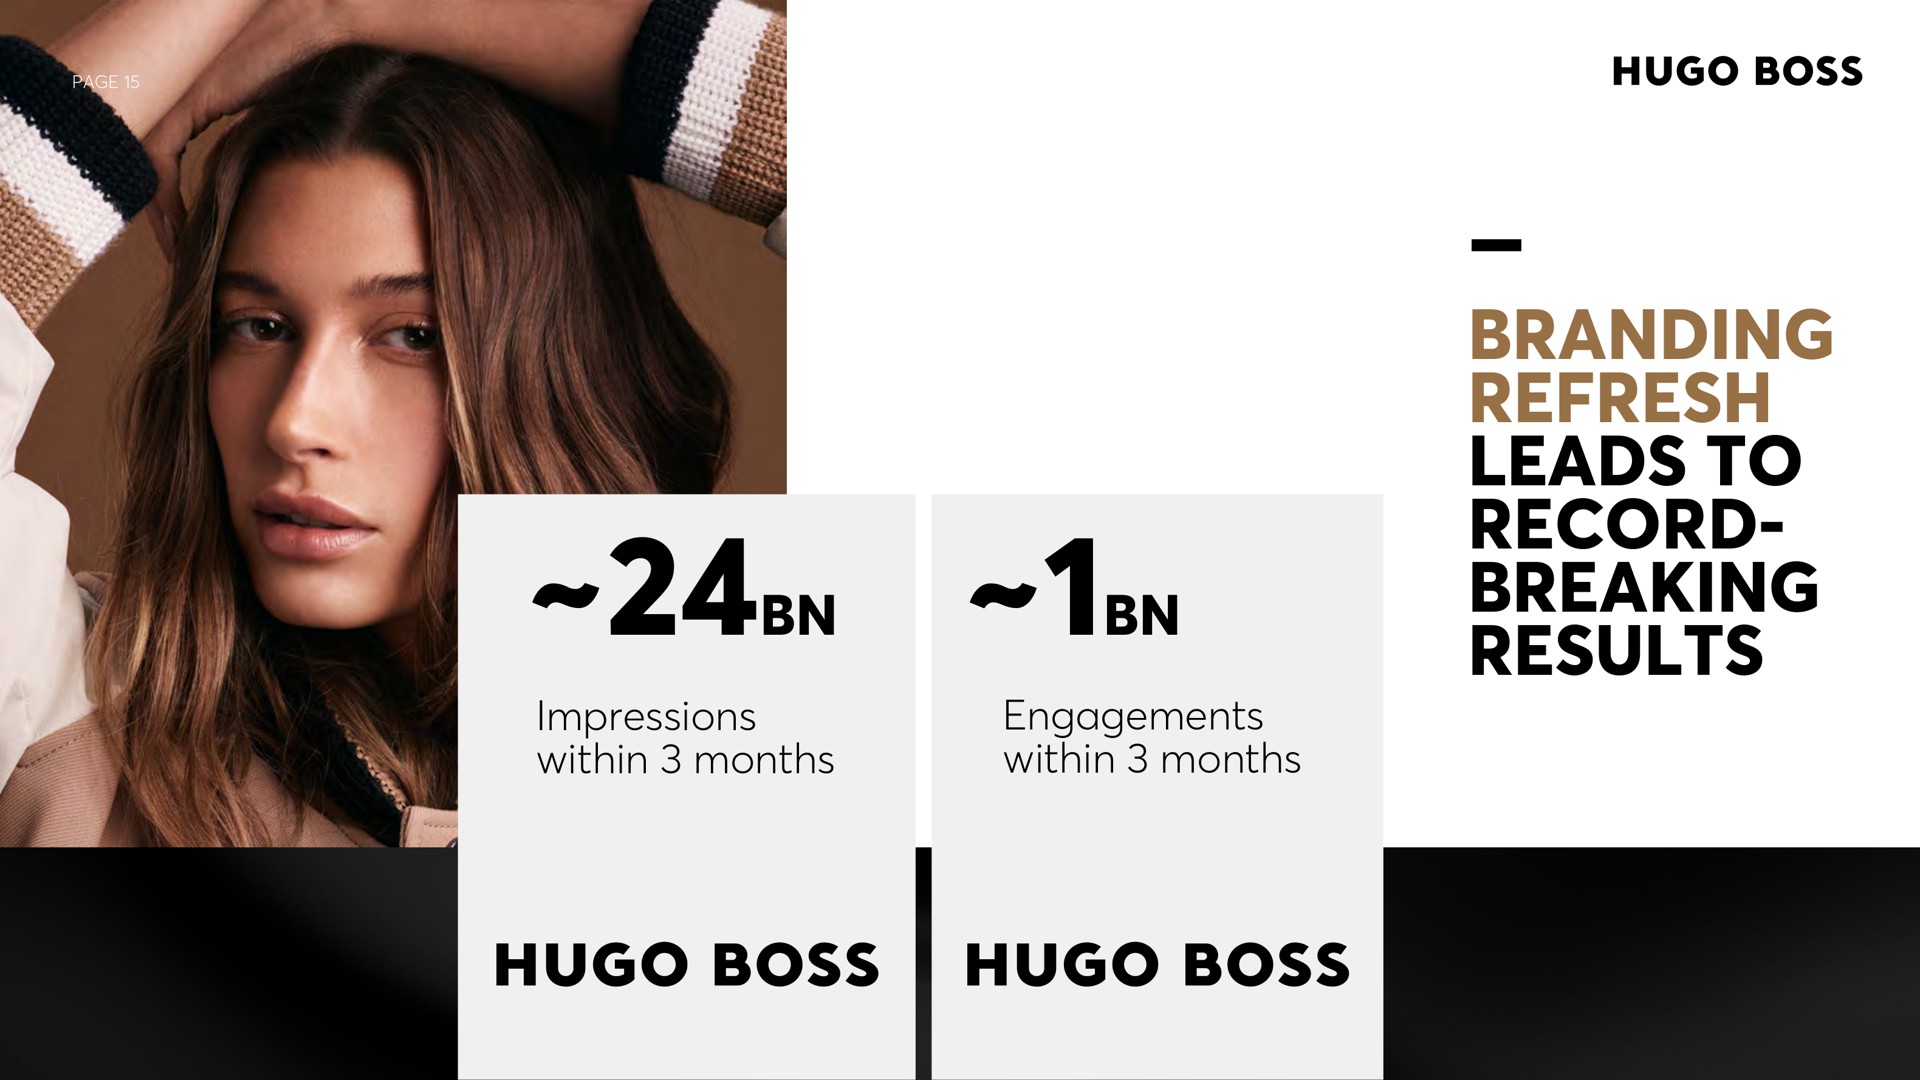 page i branding refresh leads to record breaking results impressions within months engagements within months ton boss boss | Hugo Boss